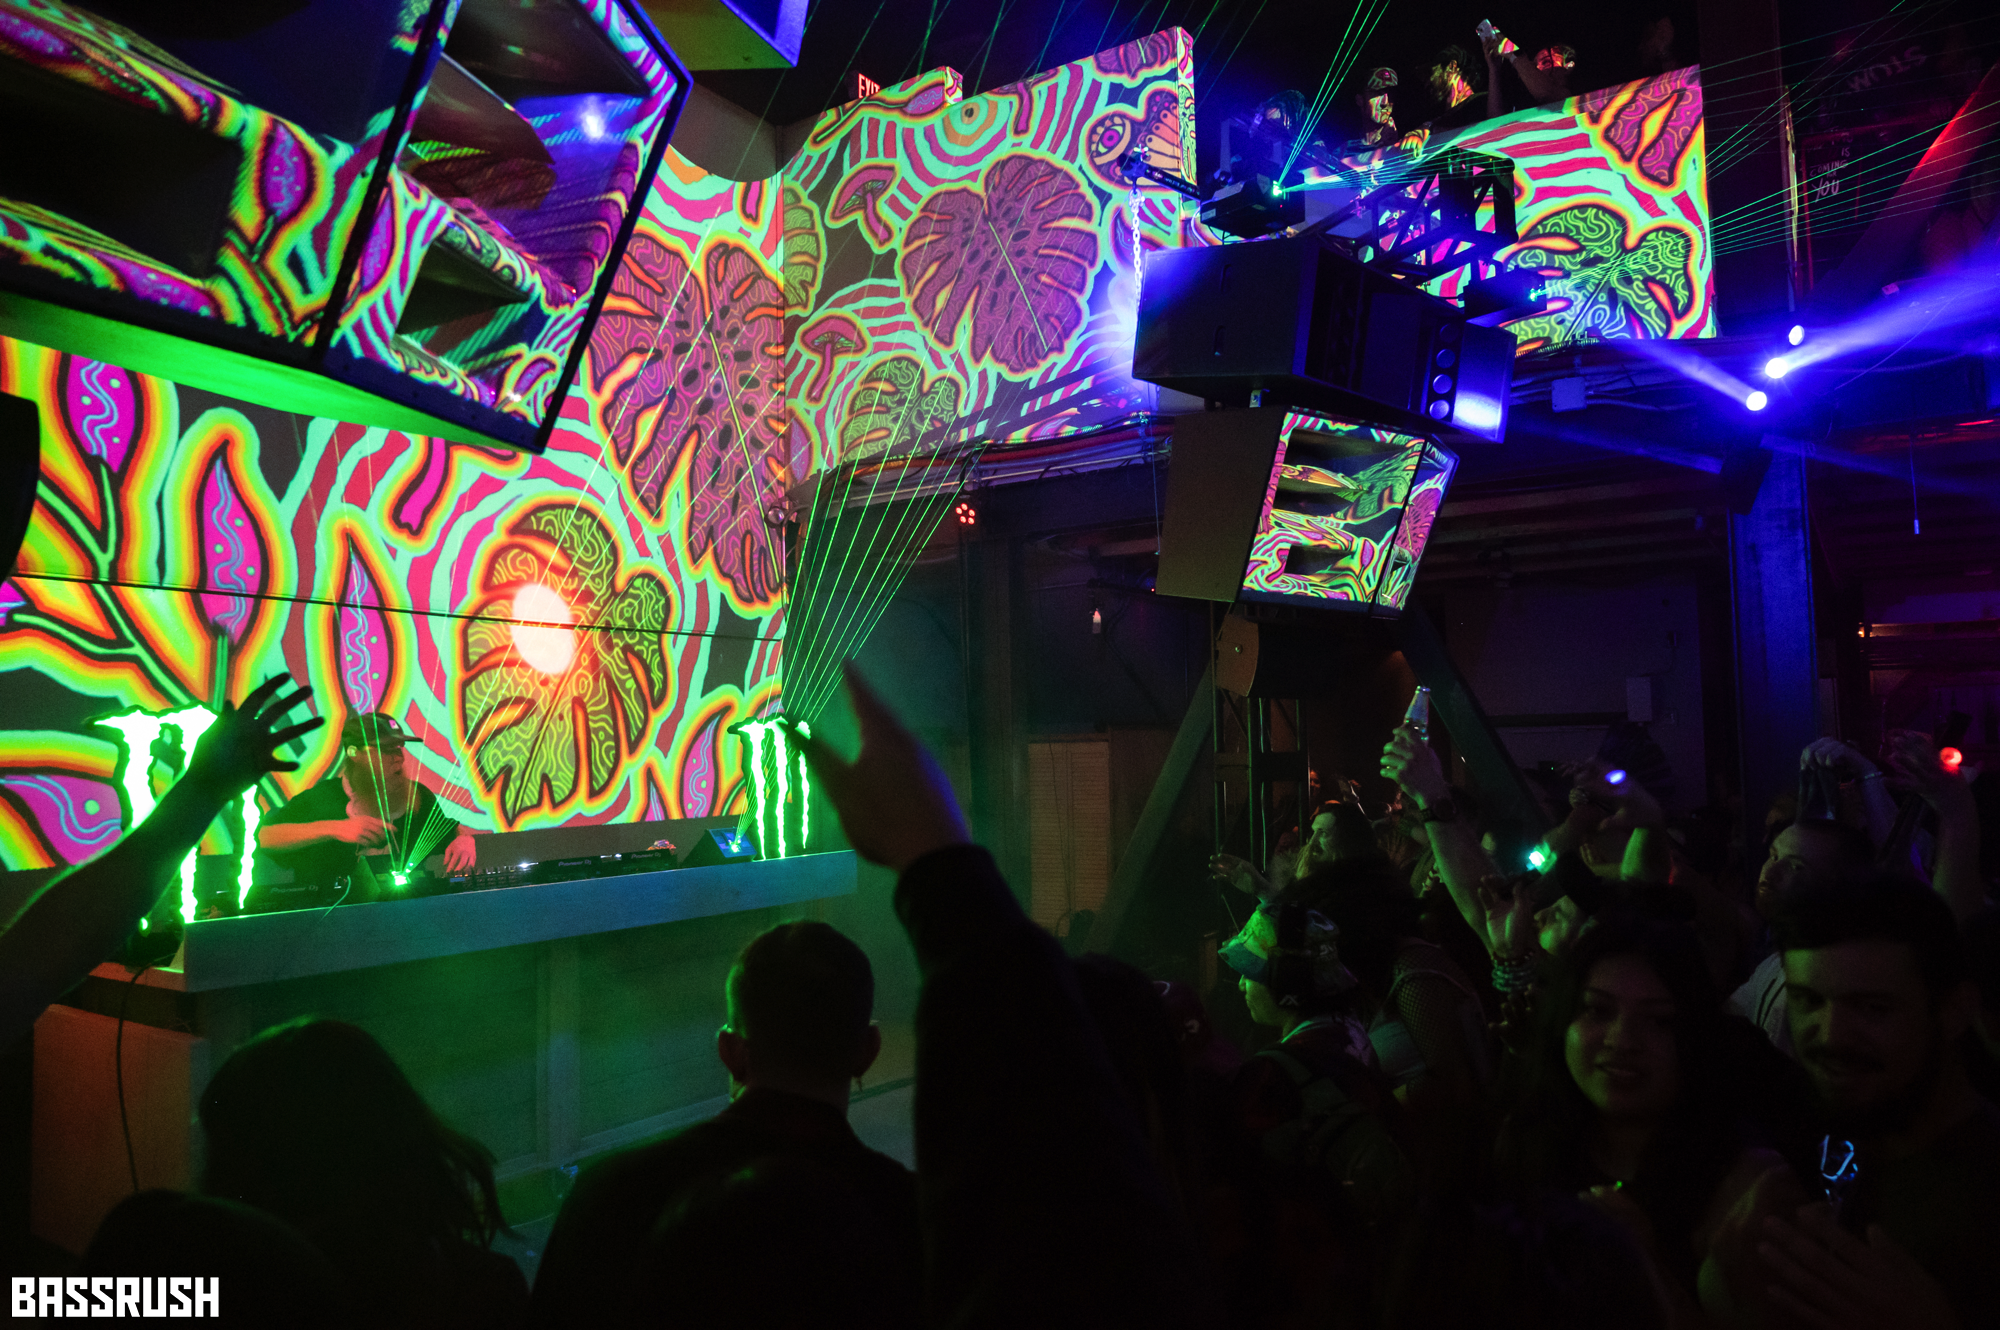 Psychedelic projections behind the DJ booth in the Main Room.